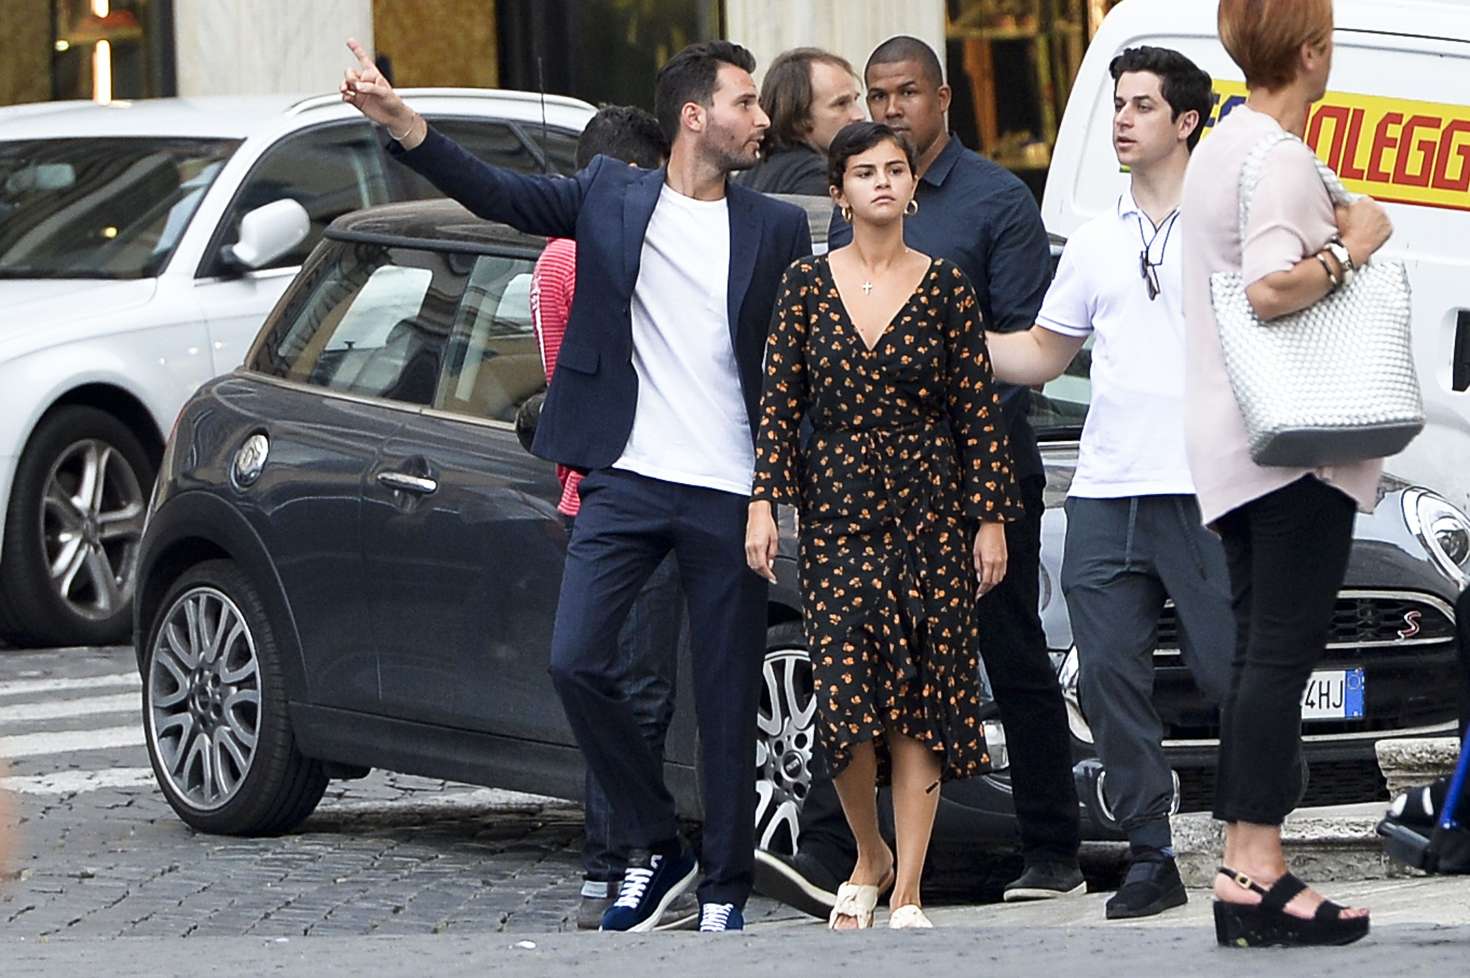 Selena Gomez out in Rome